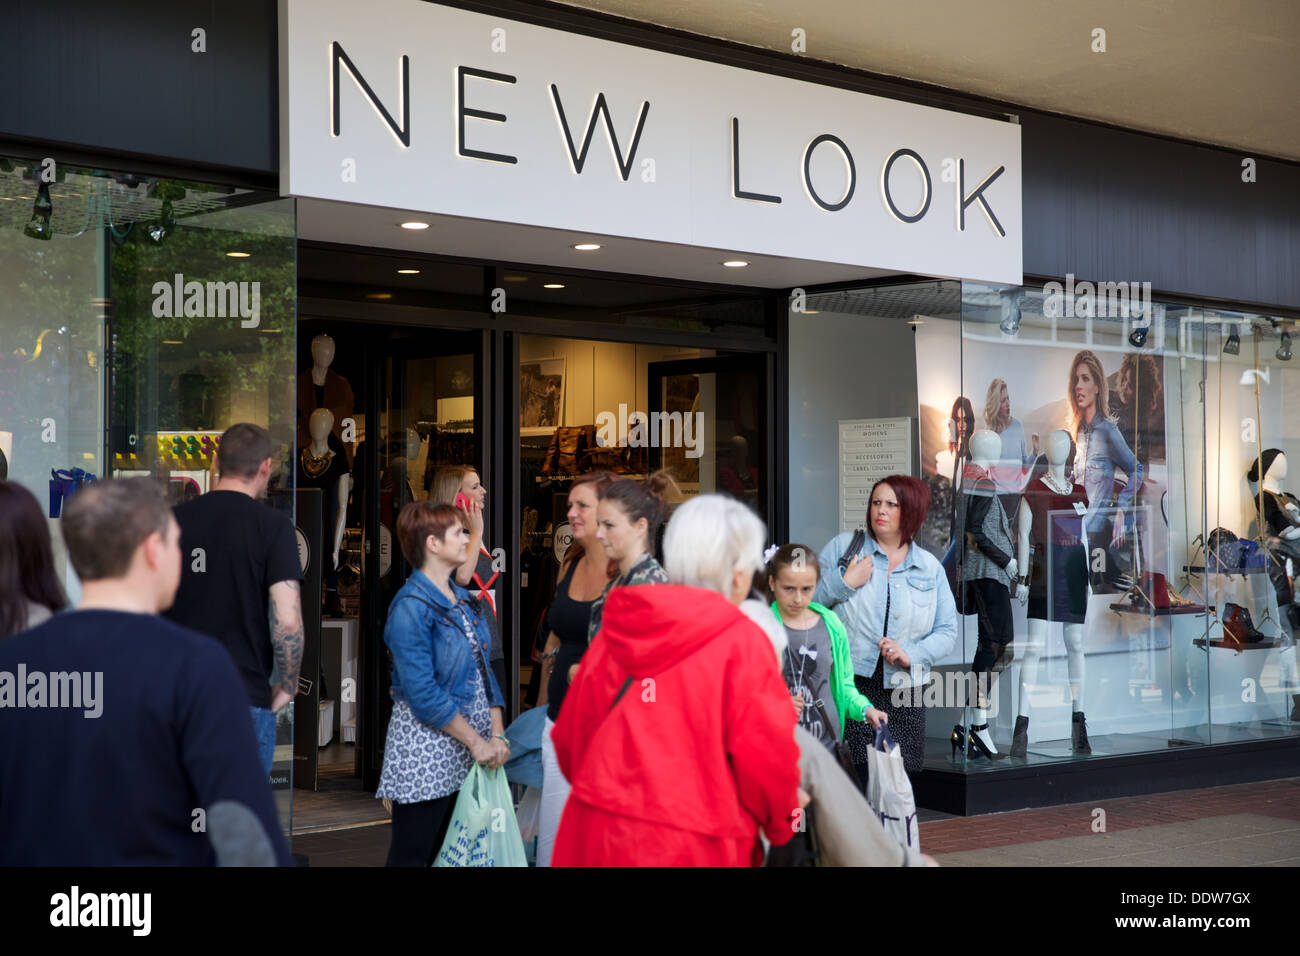 New Look Shop Front Stock Photo